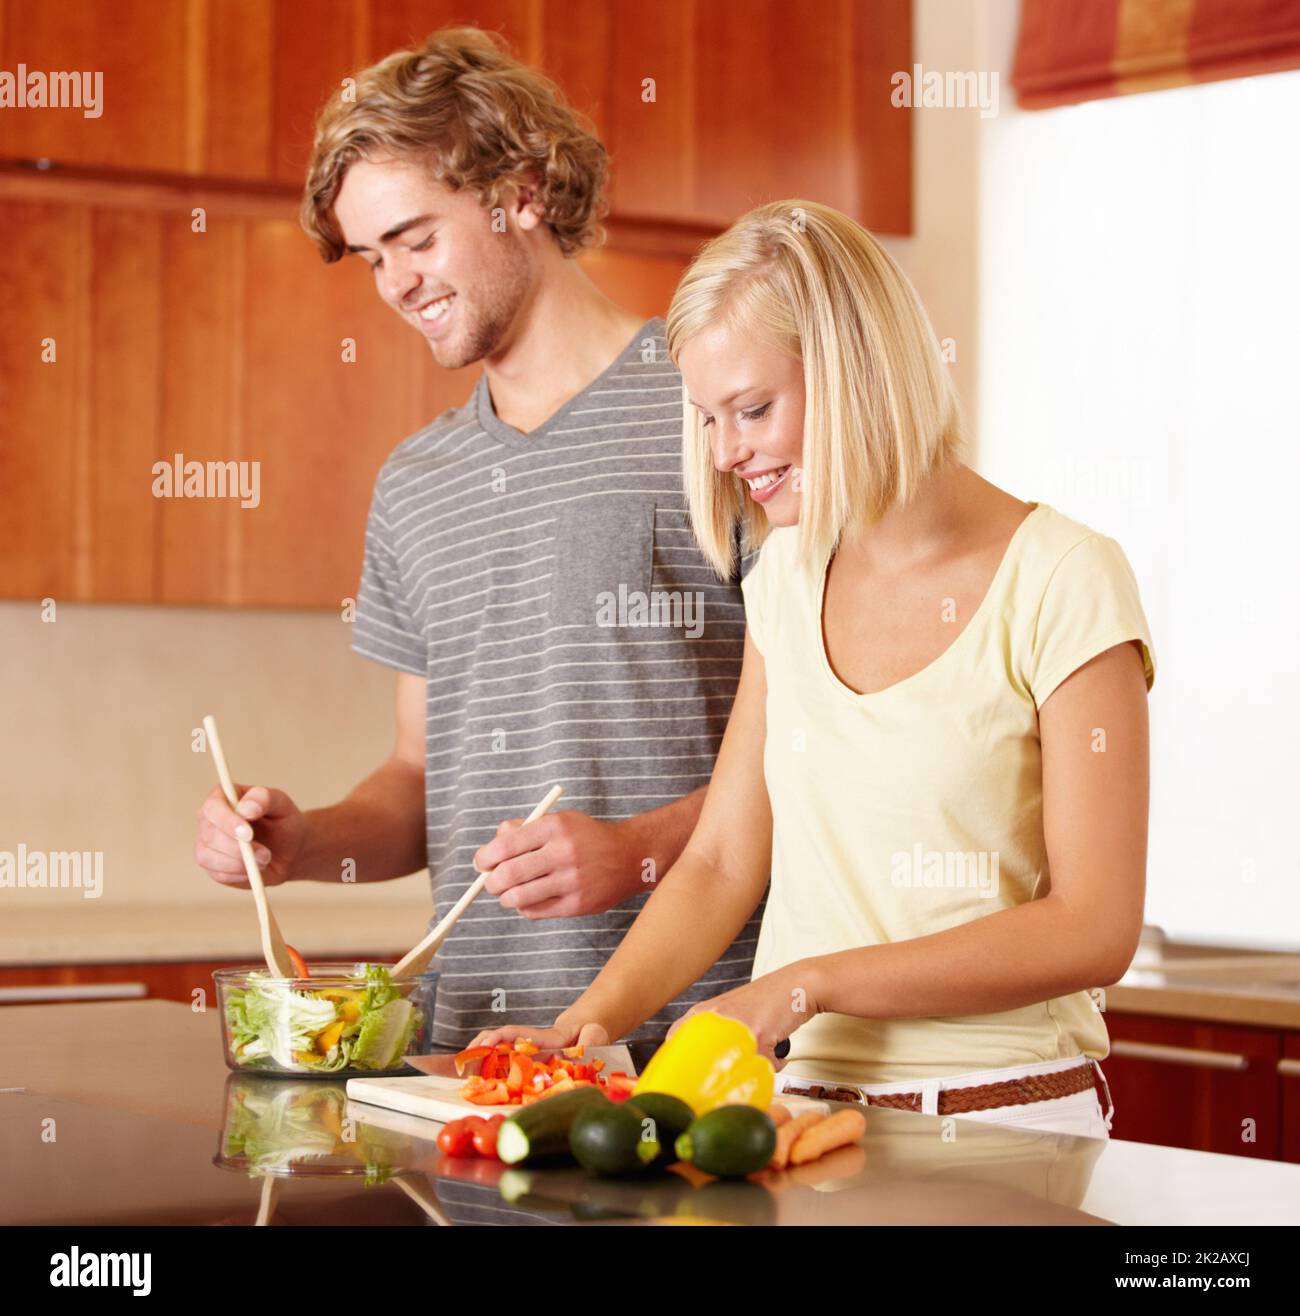 Cooking together. A young couple making dinner in the kitchen. Stock Photo